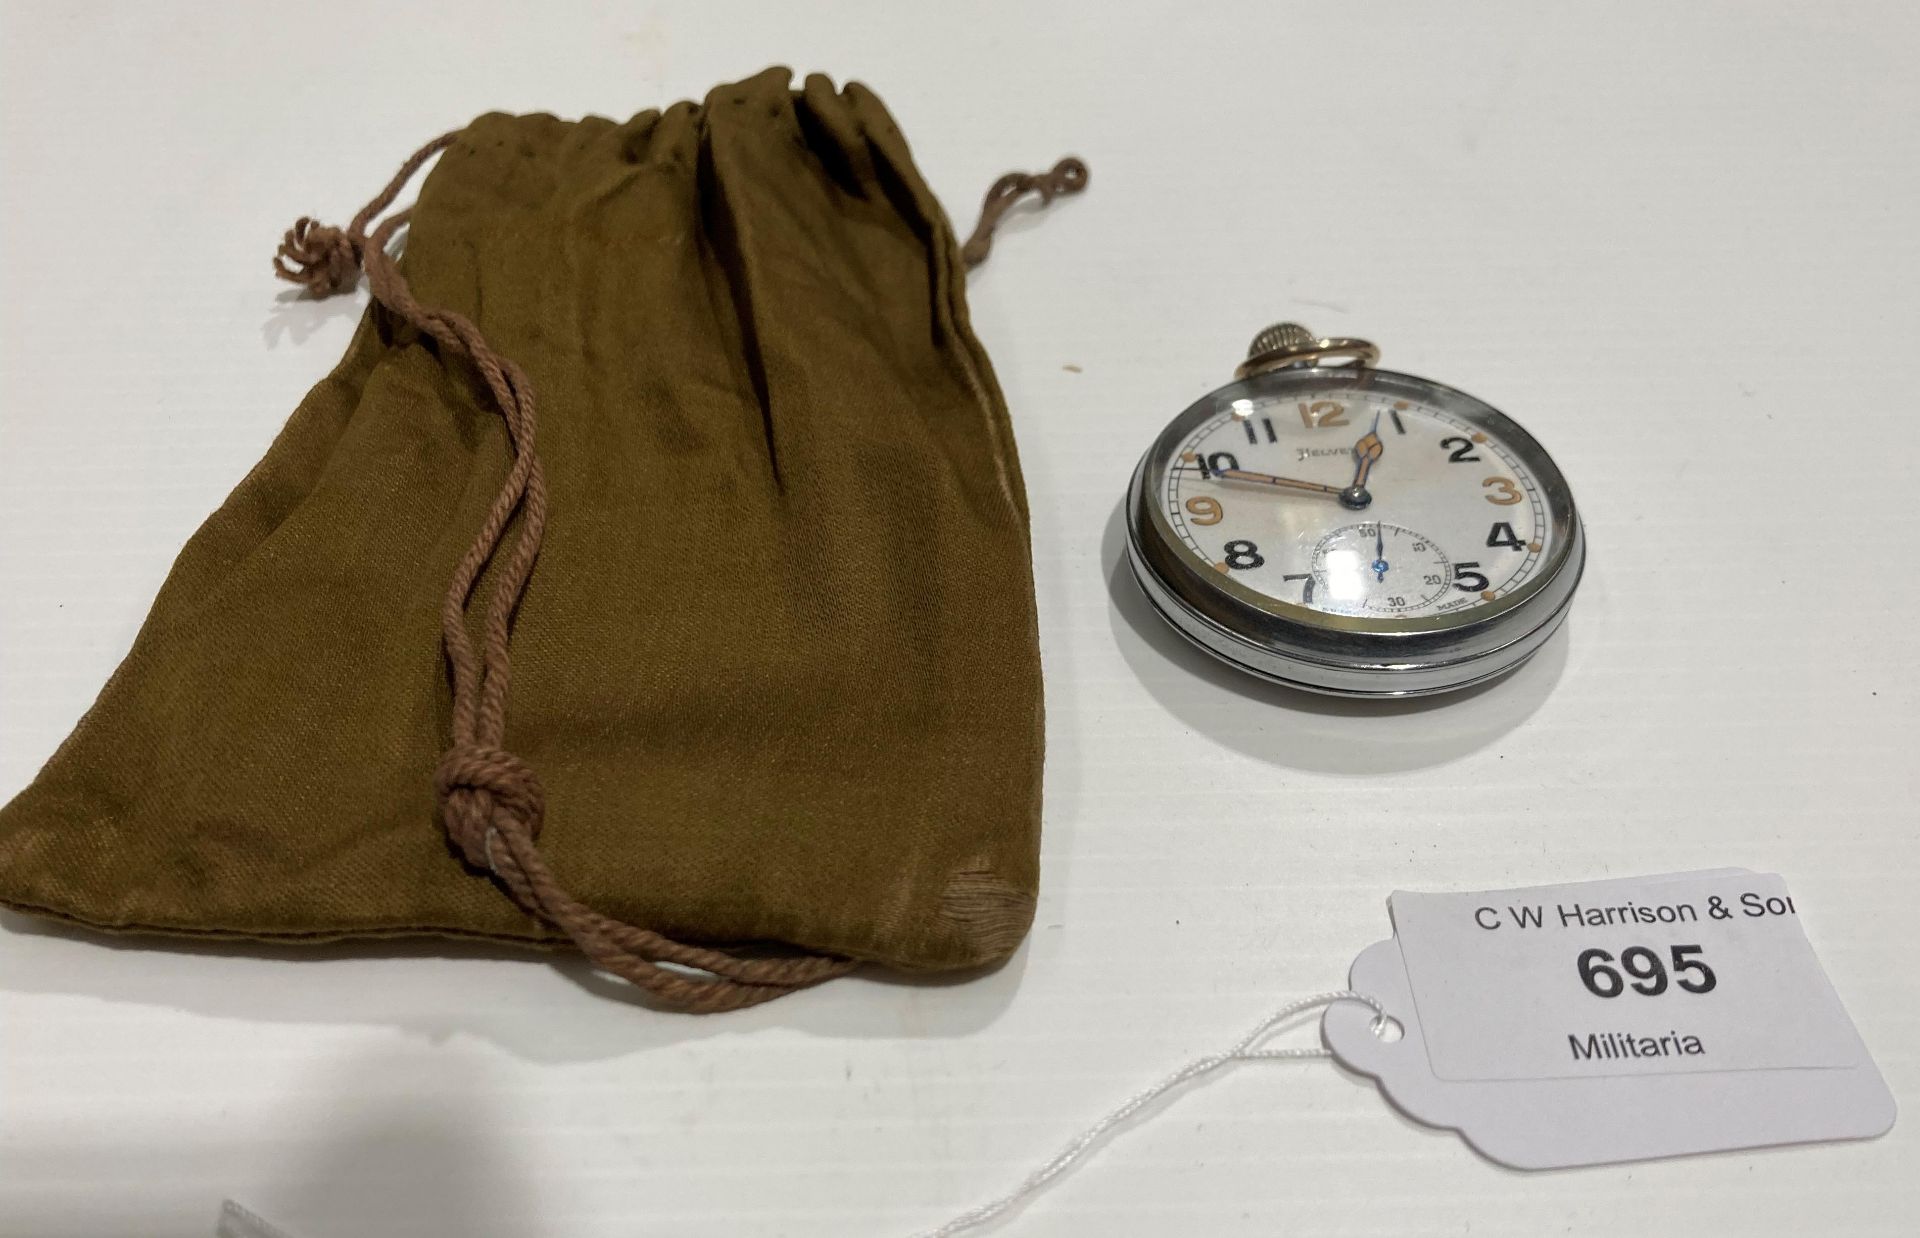 British WWII Military pocket watch by Helvetia Circa 1940 with stamp to back (G5/TP P22242) and